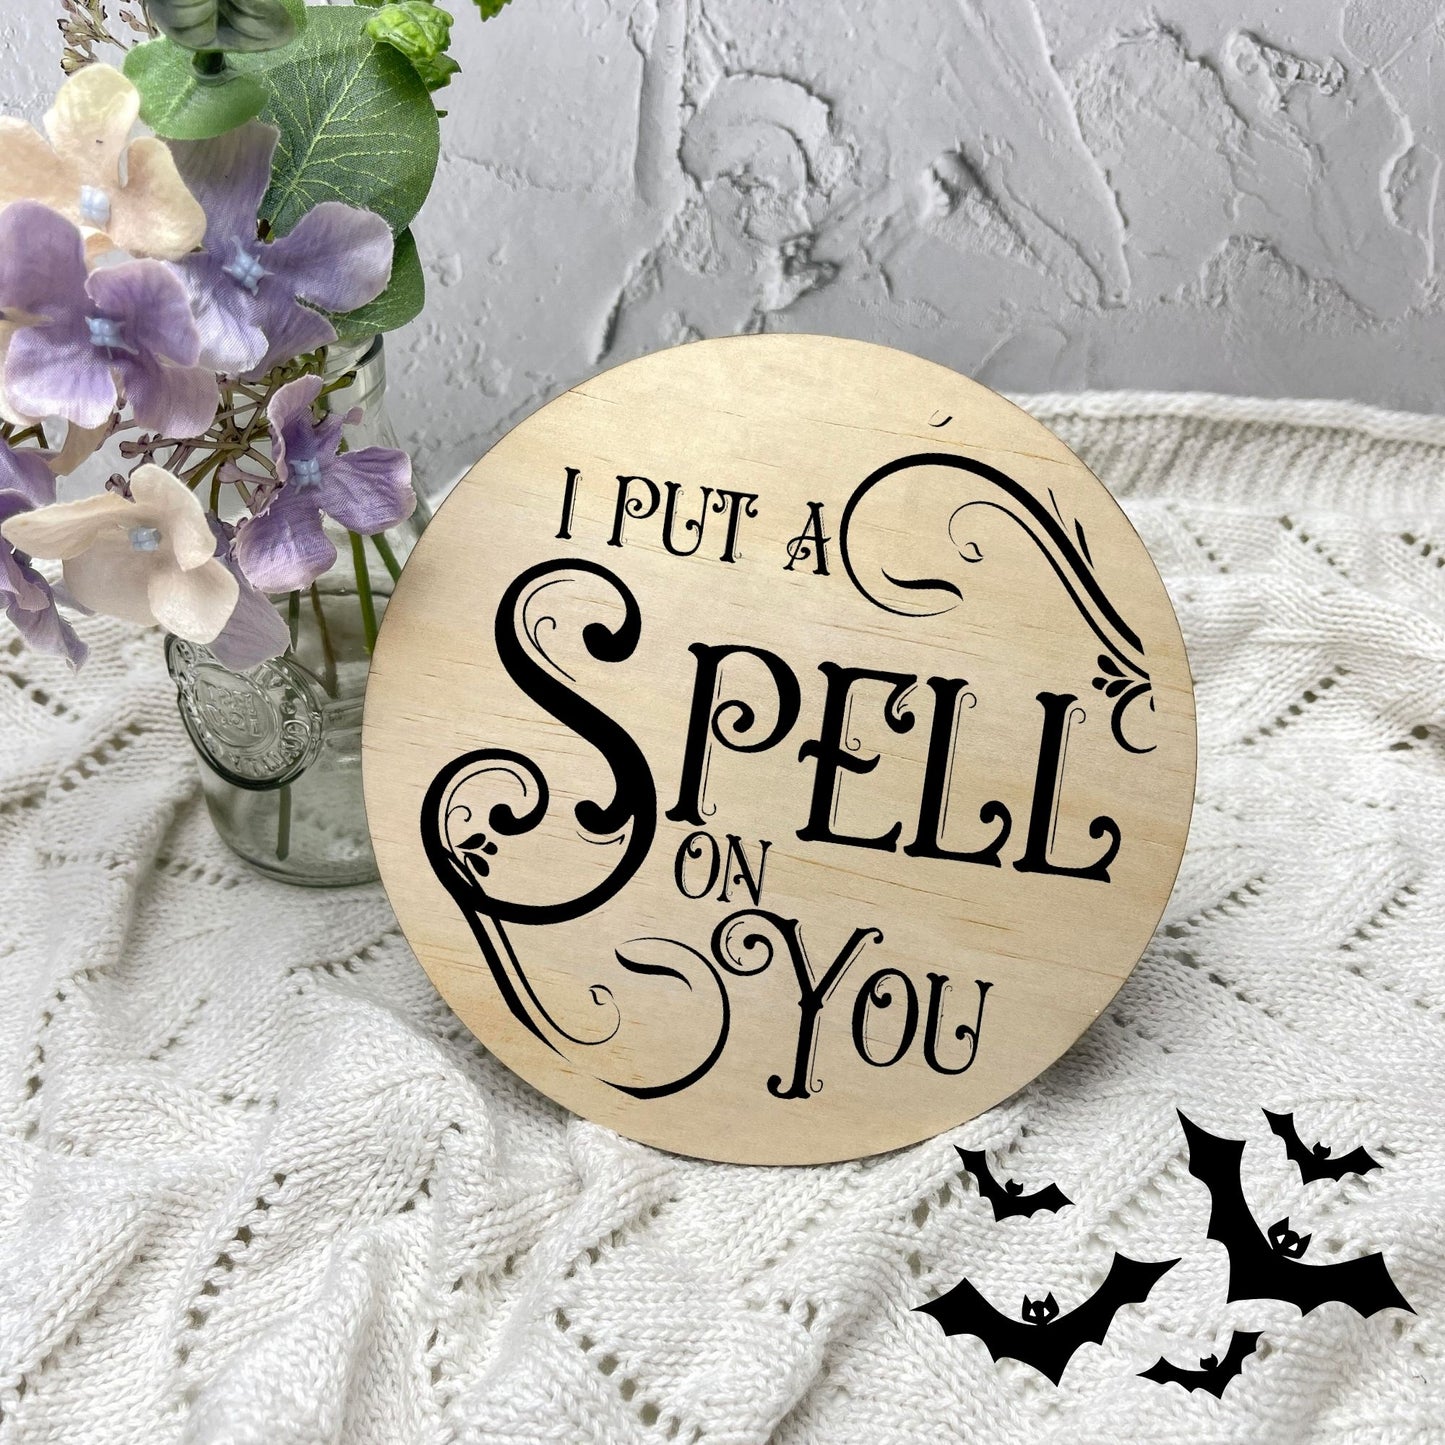 I put a spell on you sign, Halloween Decor, Spooky Vibes, hocus pocus sign, trick or treat decor, haunted house h55